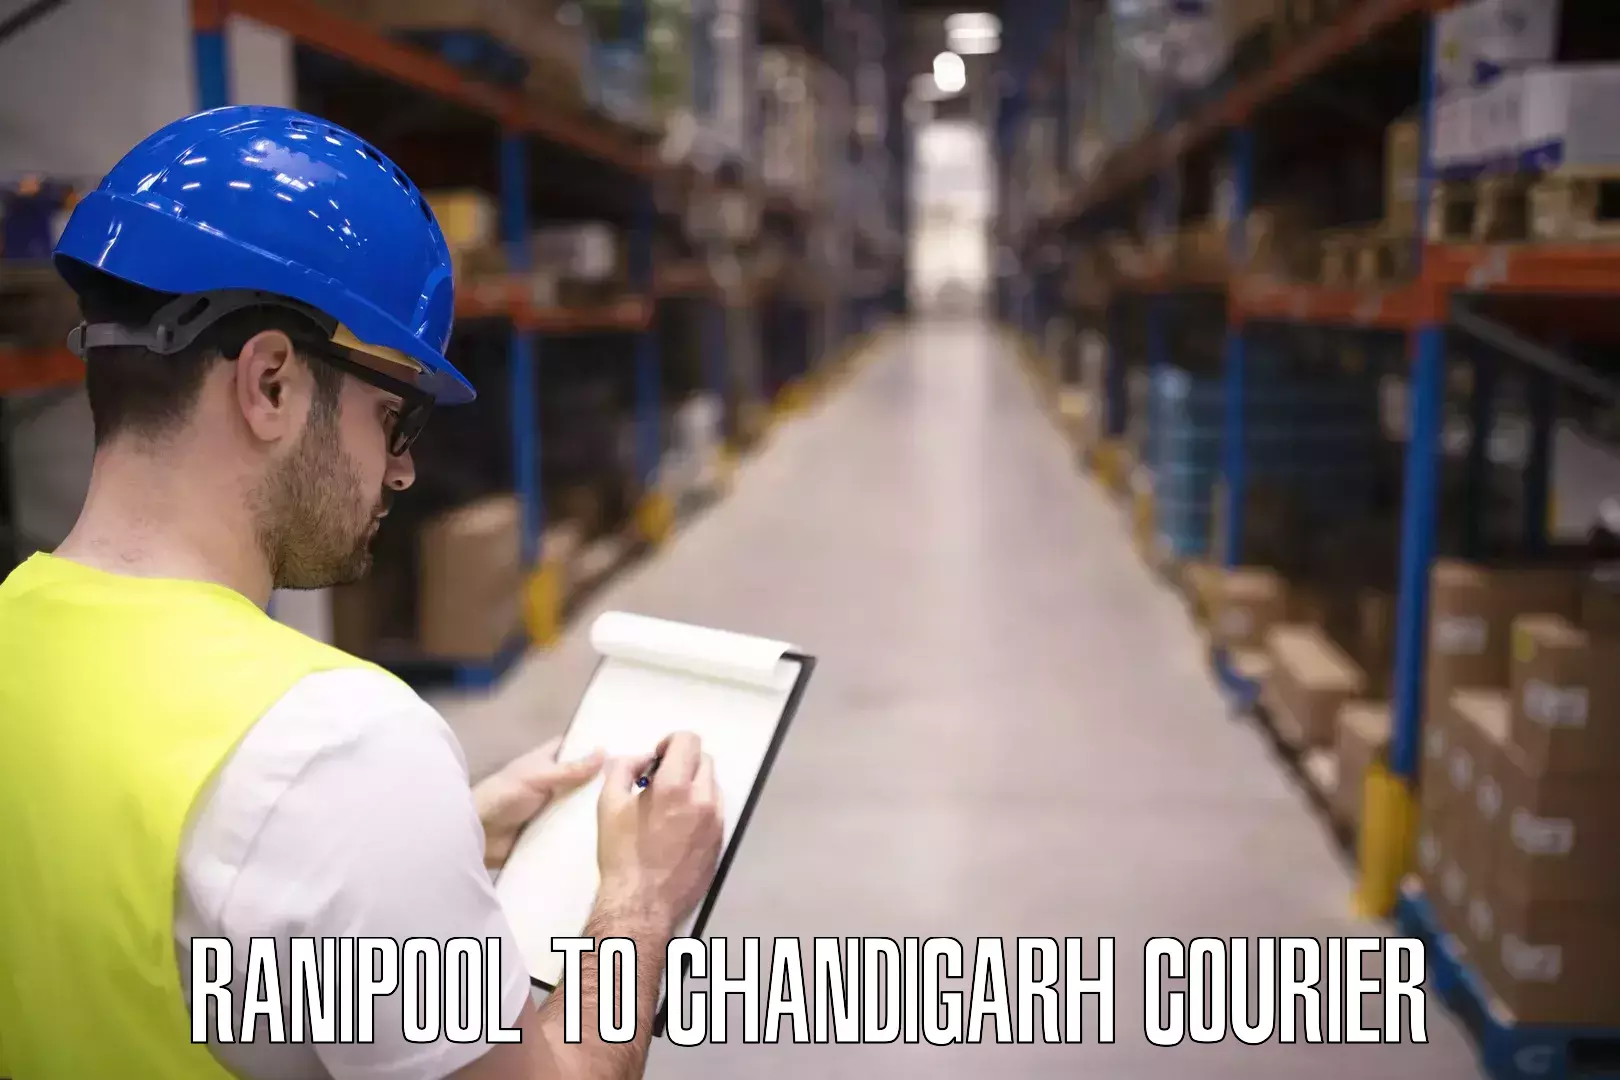 Excess baggage transport in Ranipool to Chandigarh